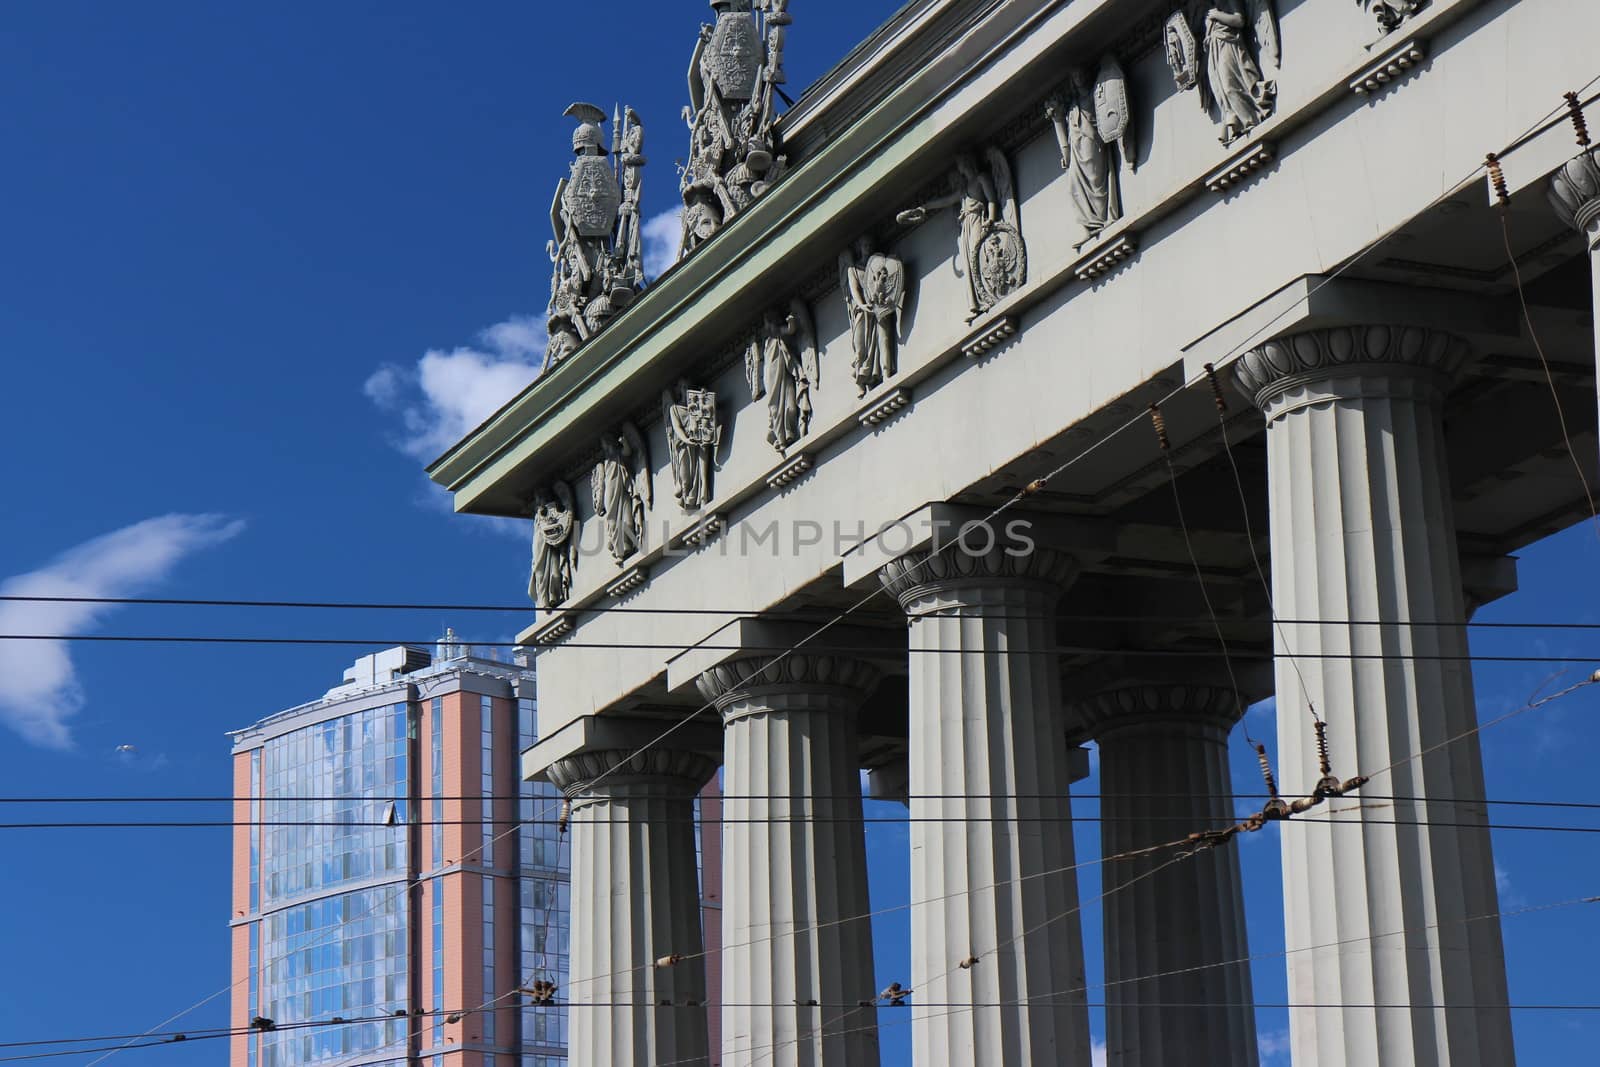 View of the triumphal Gate and building on Moskovsky Avenue in St. Petersburg